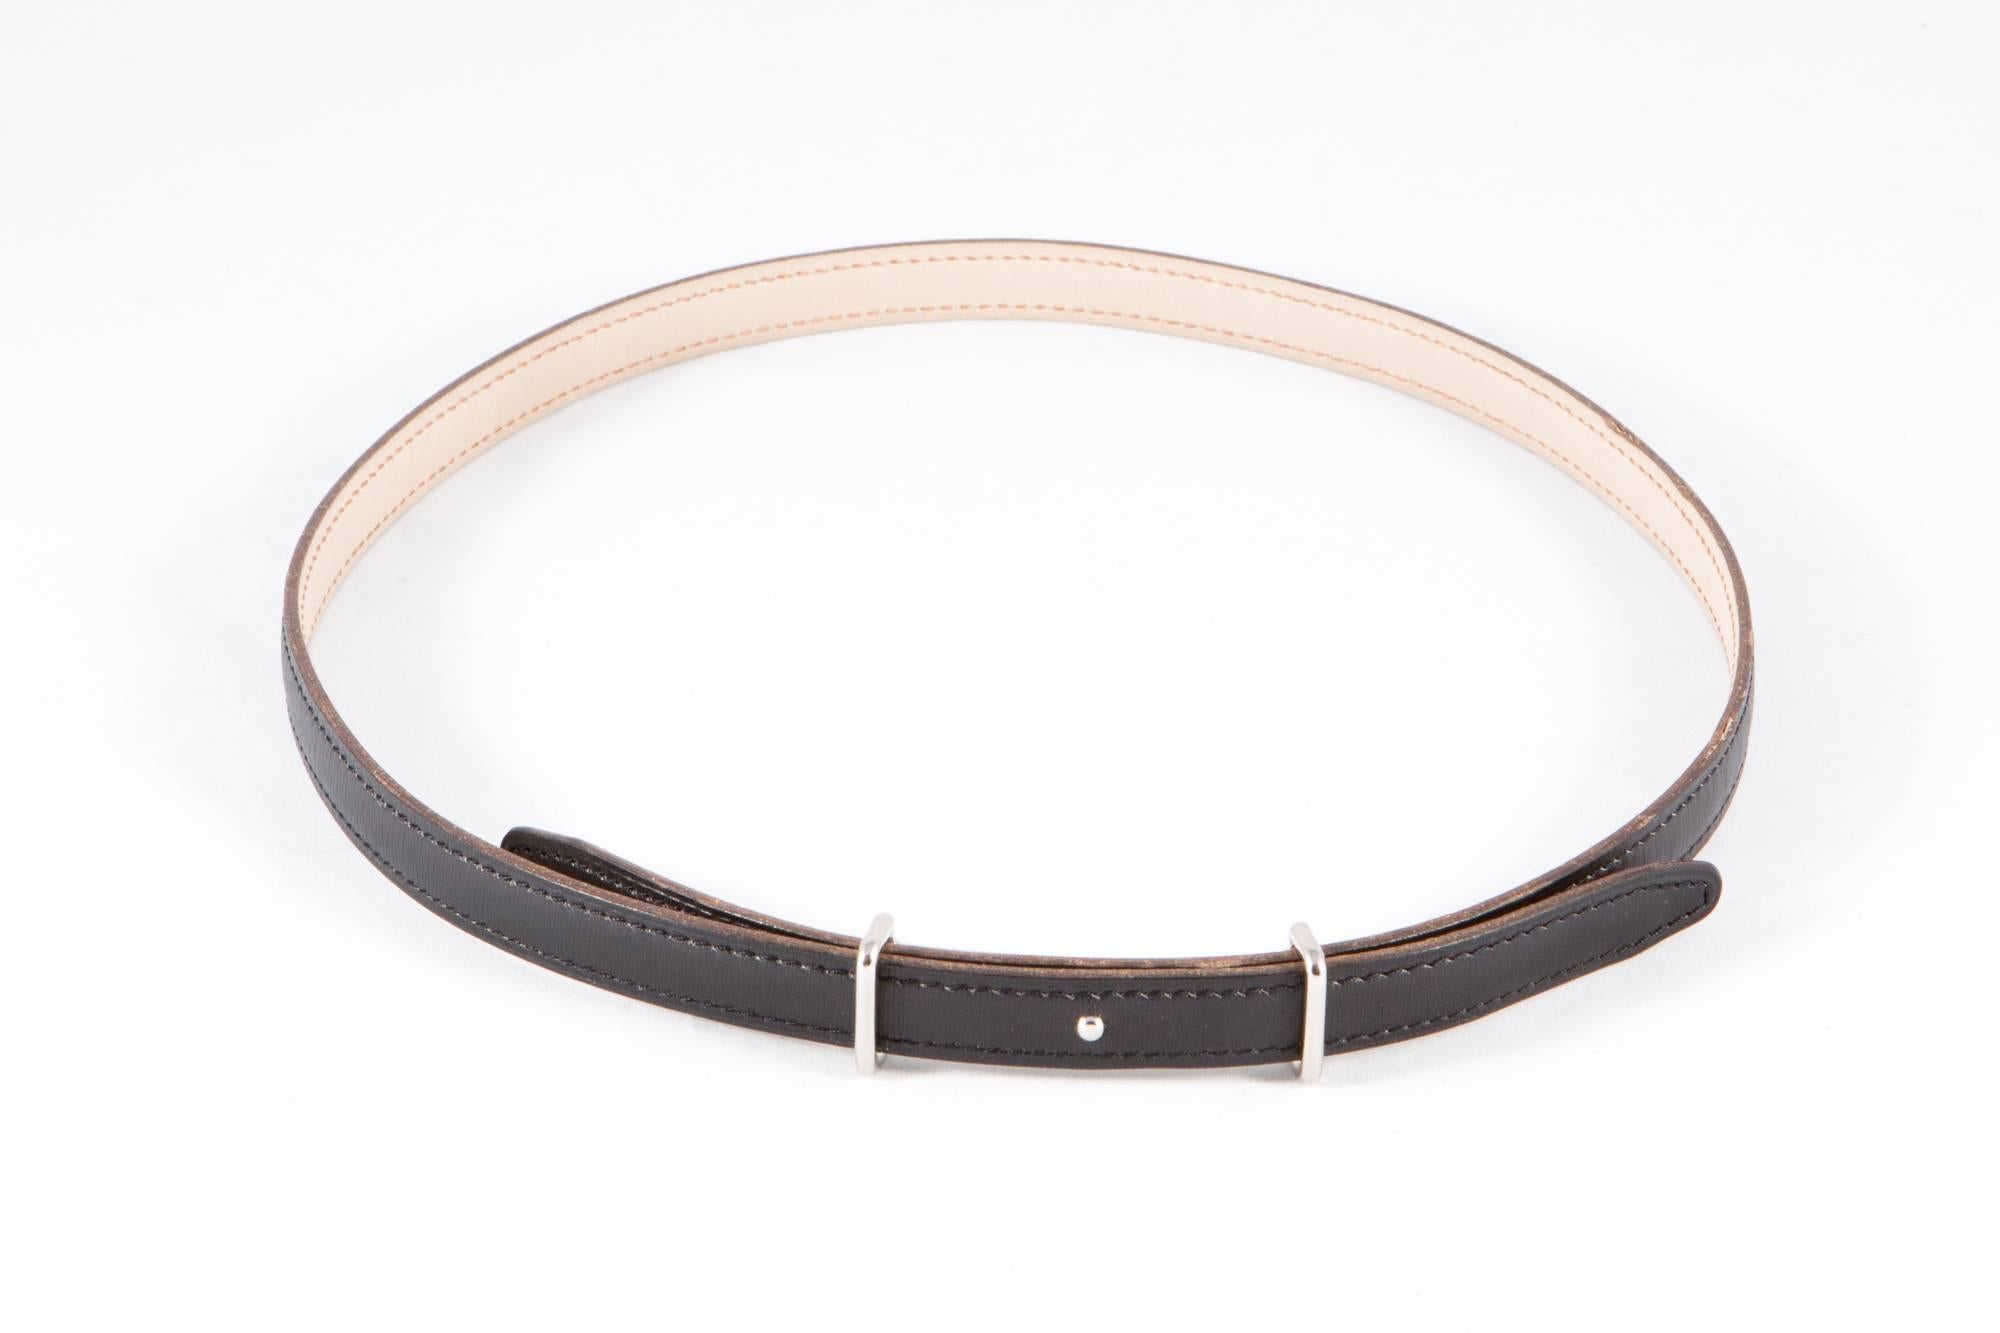 Thin black leather Hermès belt featuring a buckle in palladium plated metal & reversible leather strap in Swift/Epsom calfskin and an inside leather camel side. Letter F in square
Length:35 in. (89 cm)
In excellent vintage condition. Made in